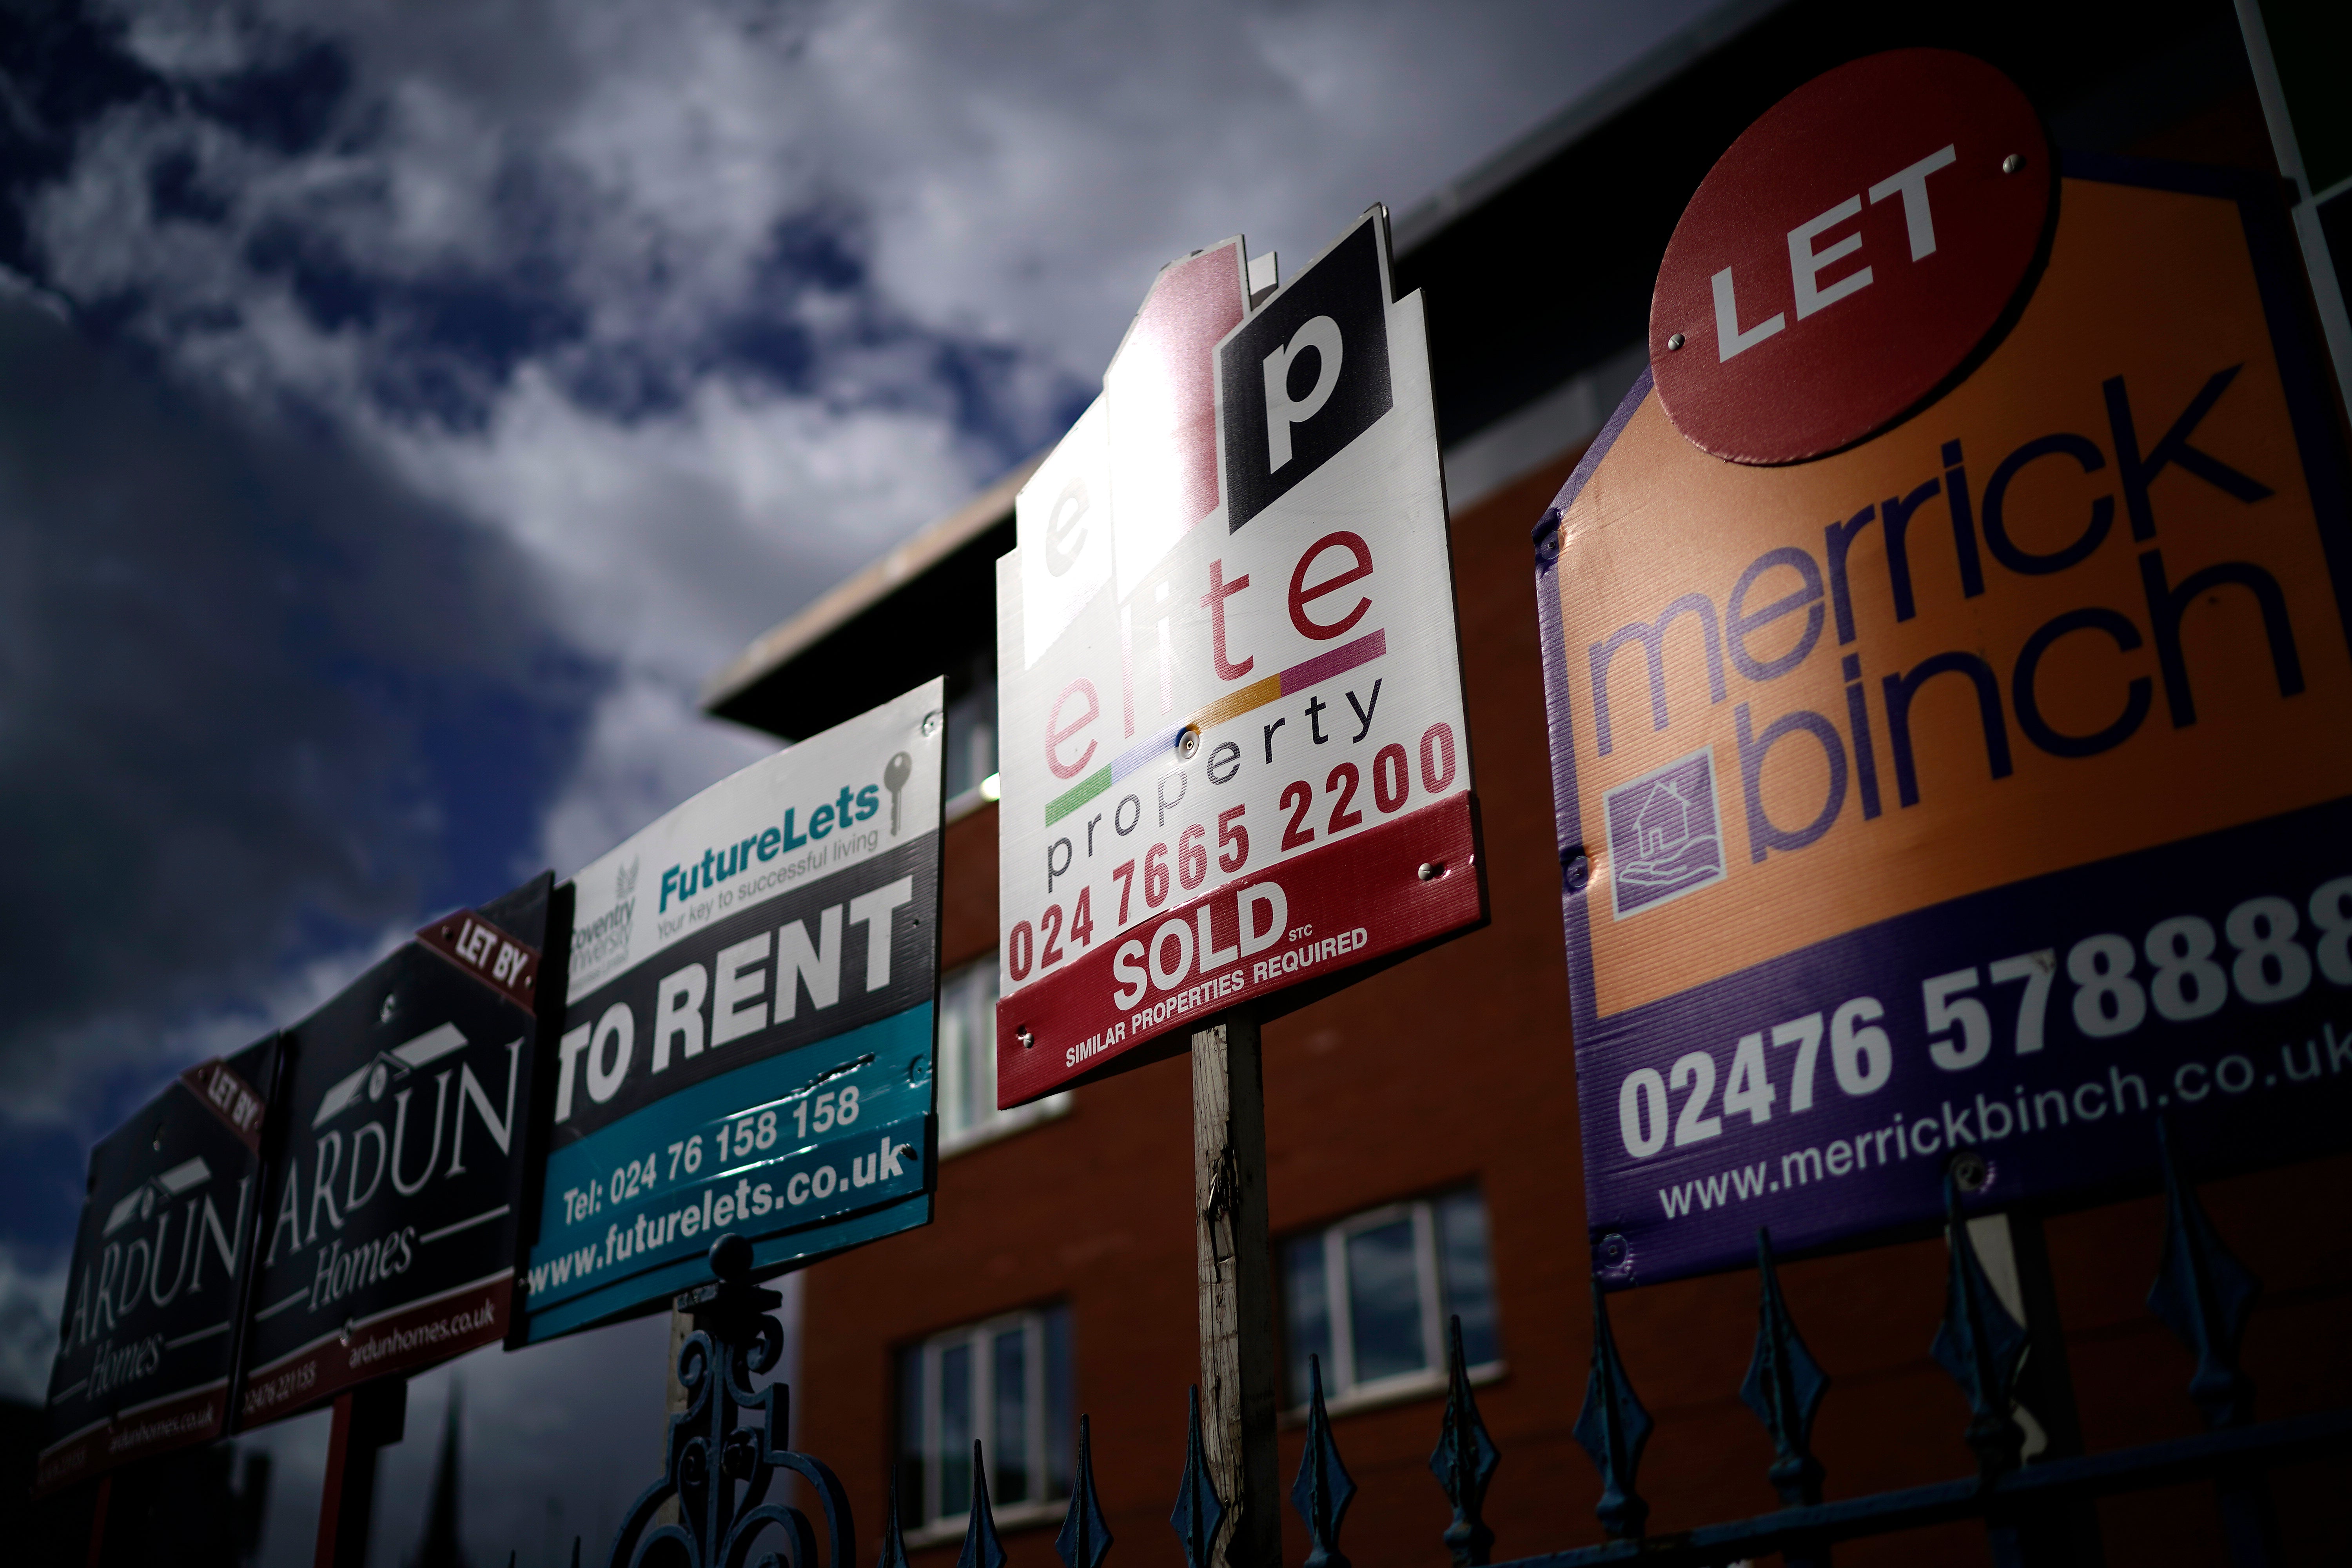 Wales saw the largest increase in property prices since March 2020